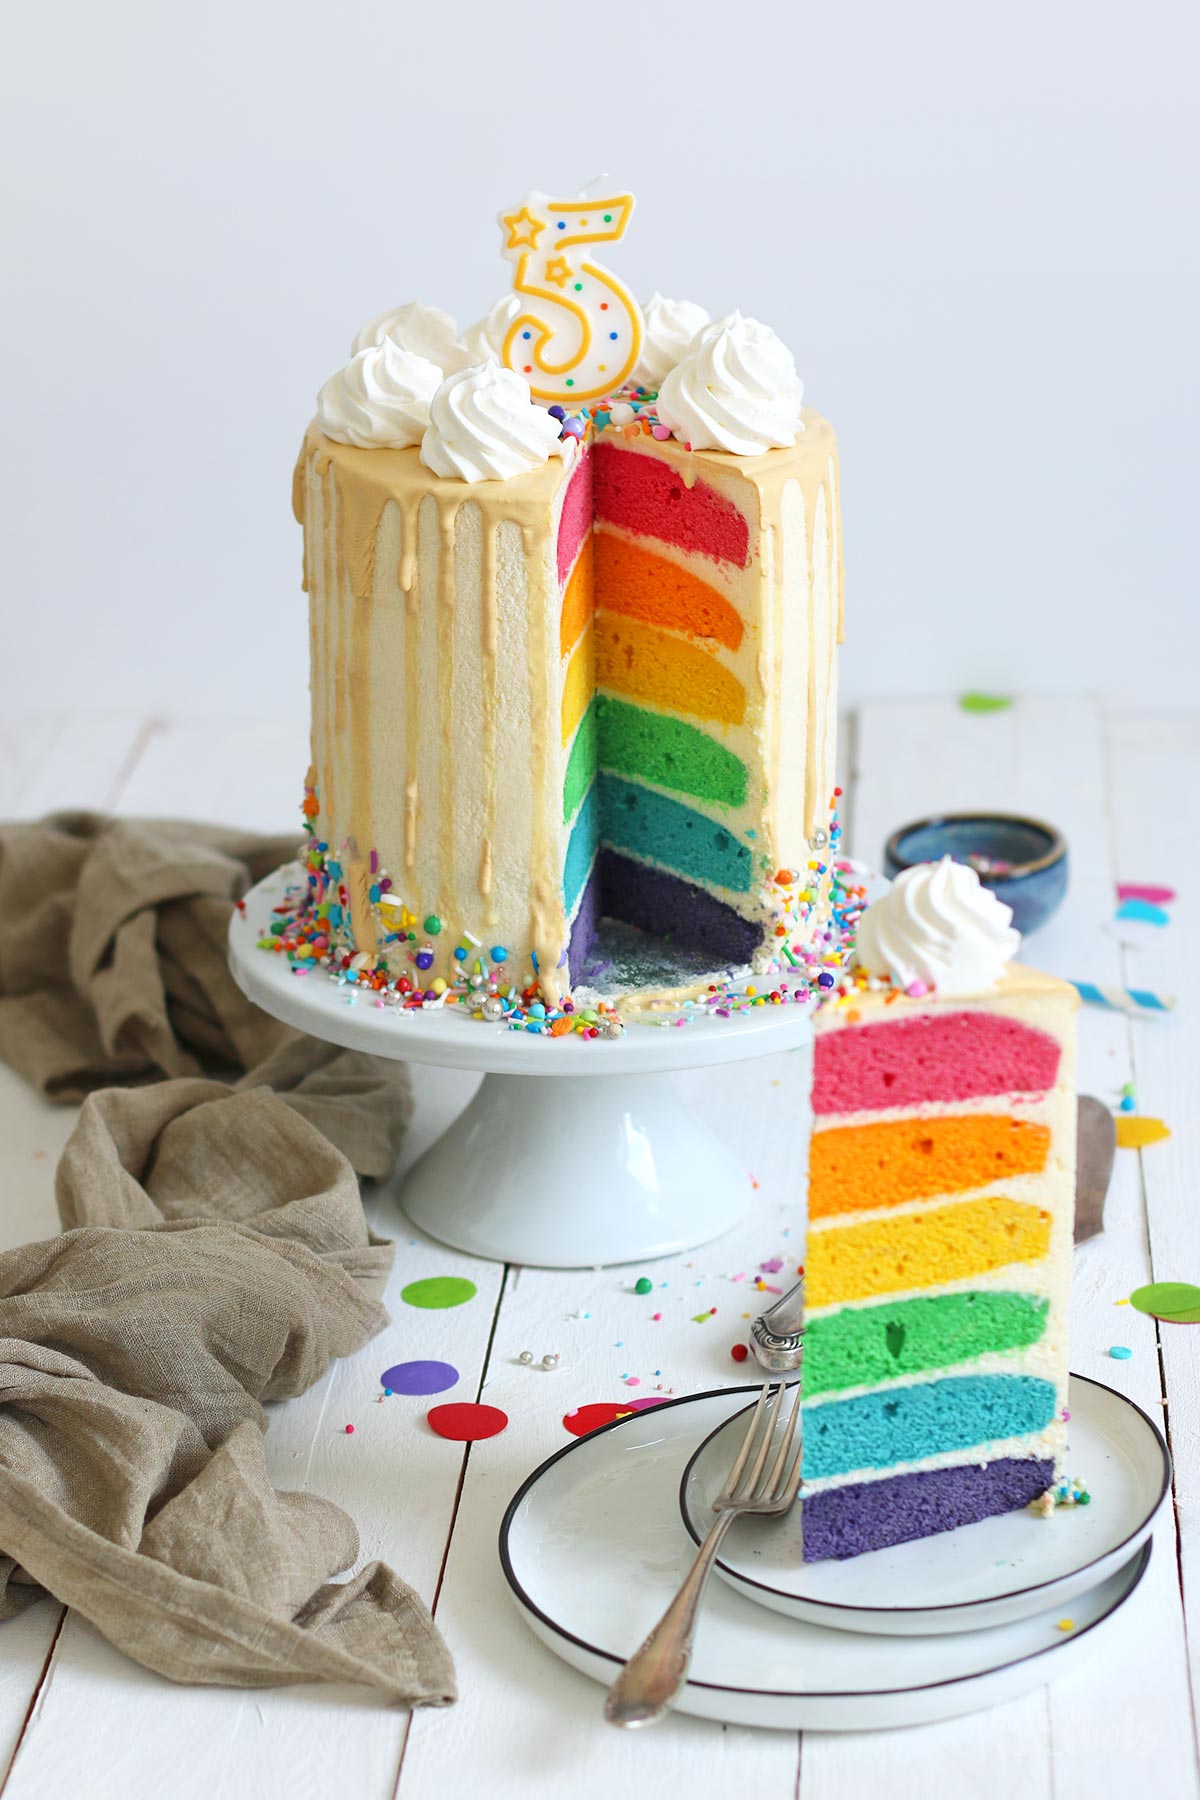 Rainbow Layer Cake | Bake to the roots